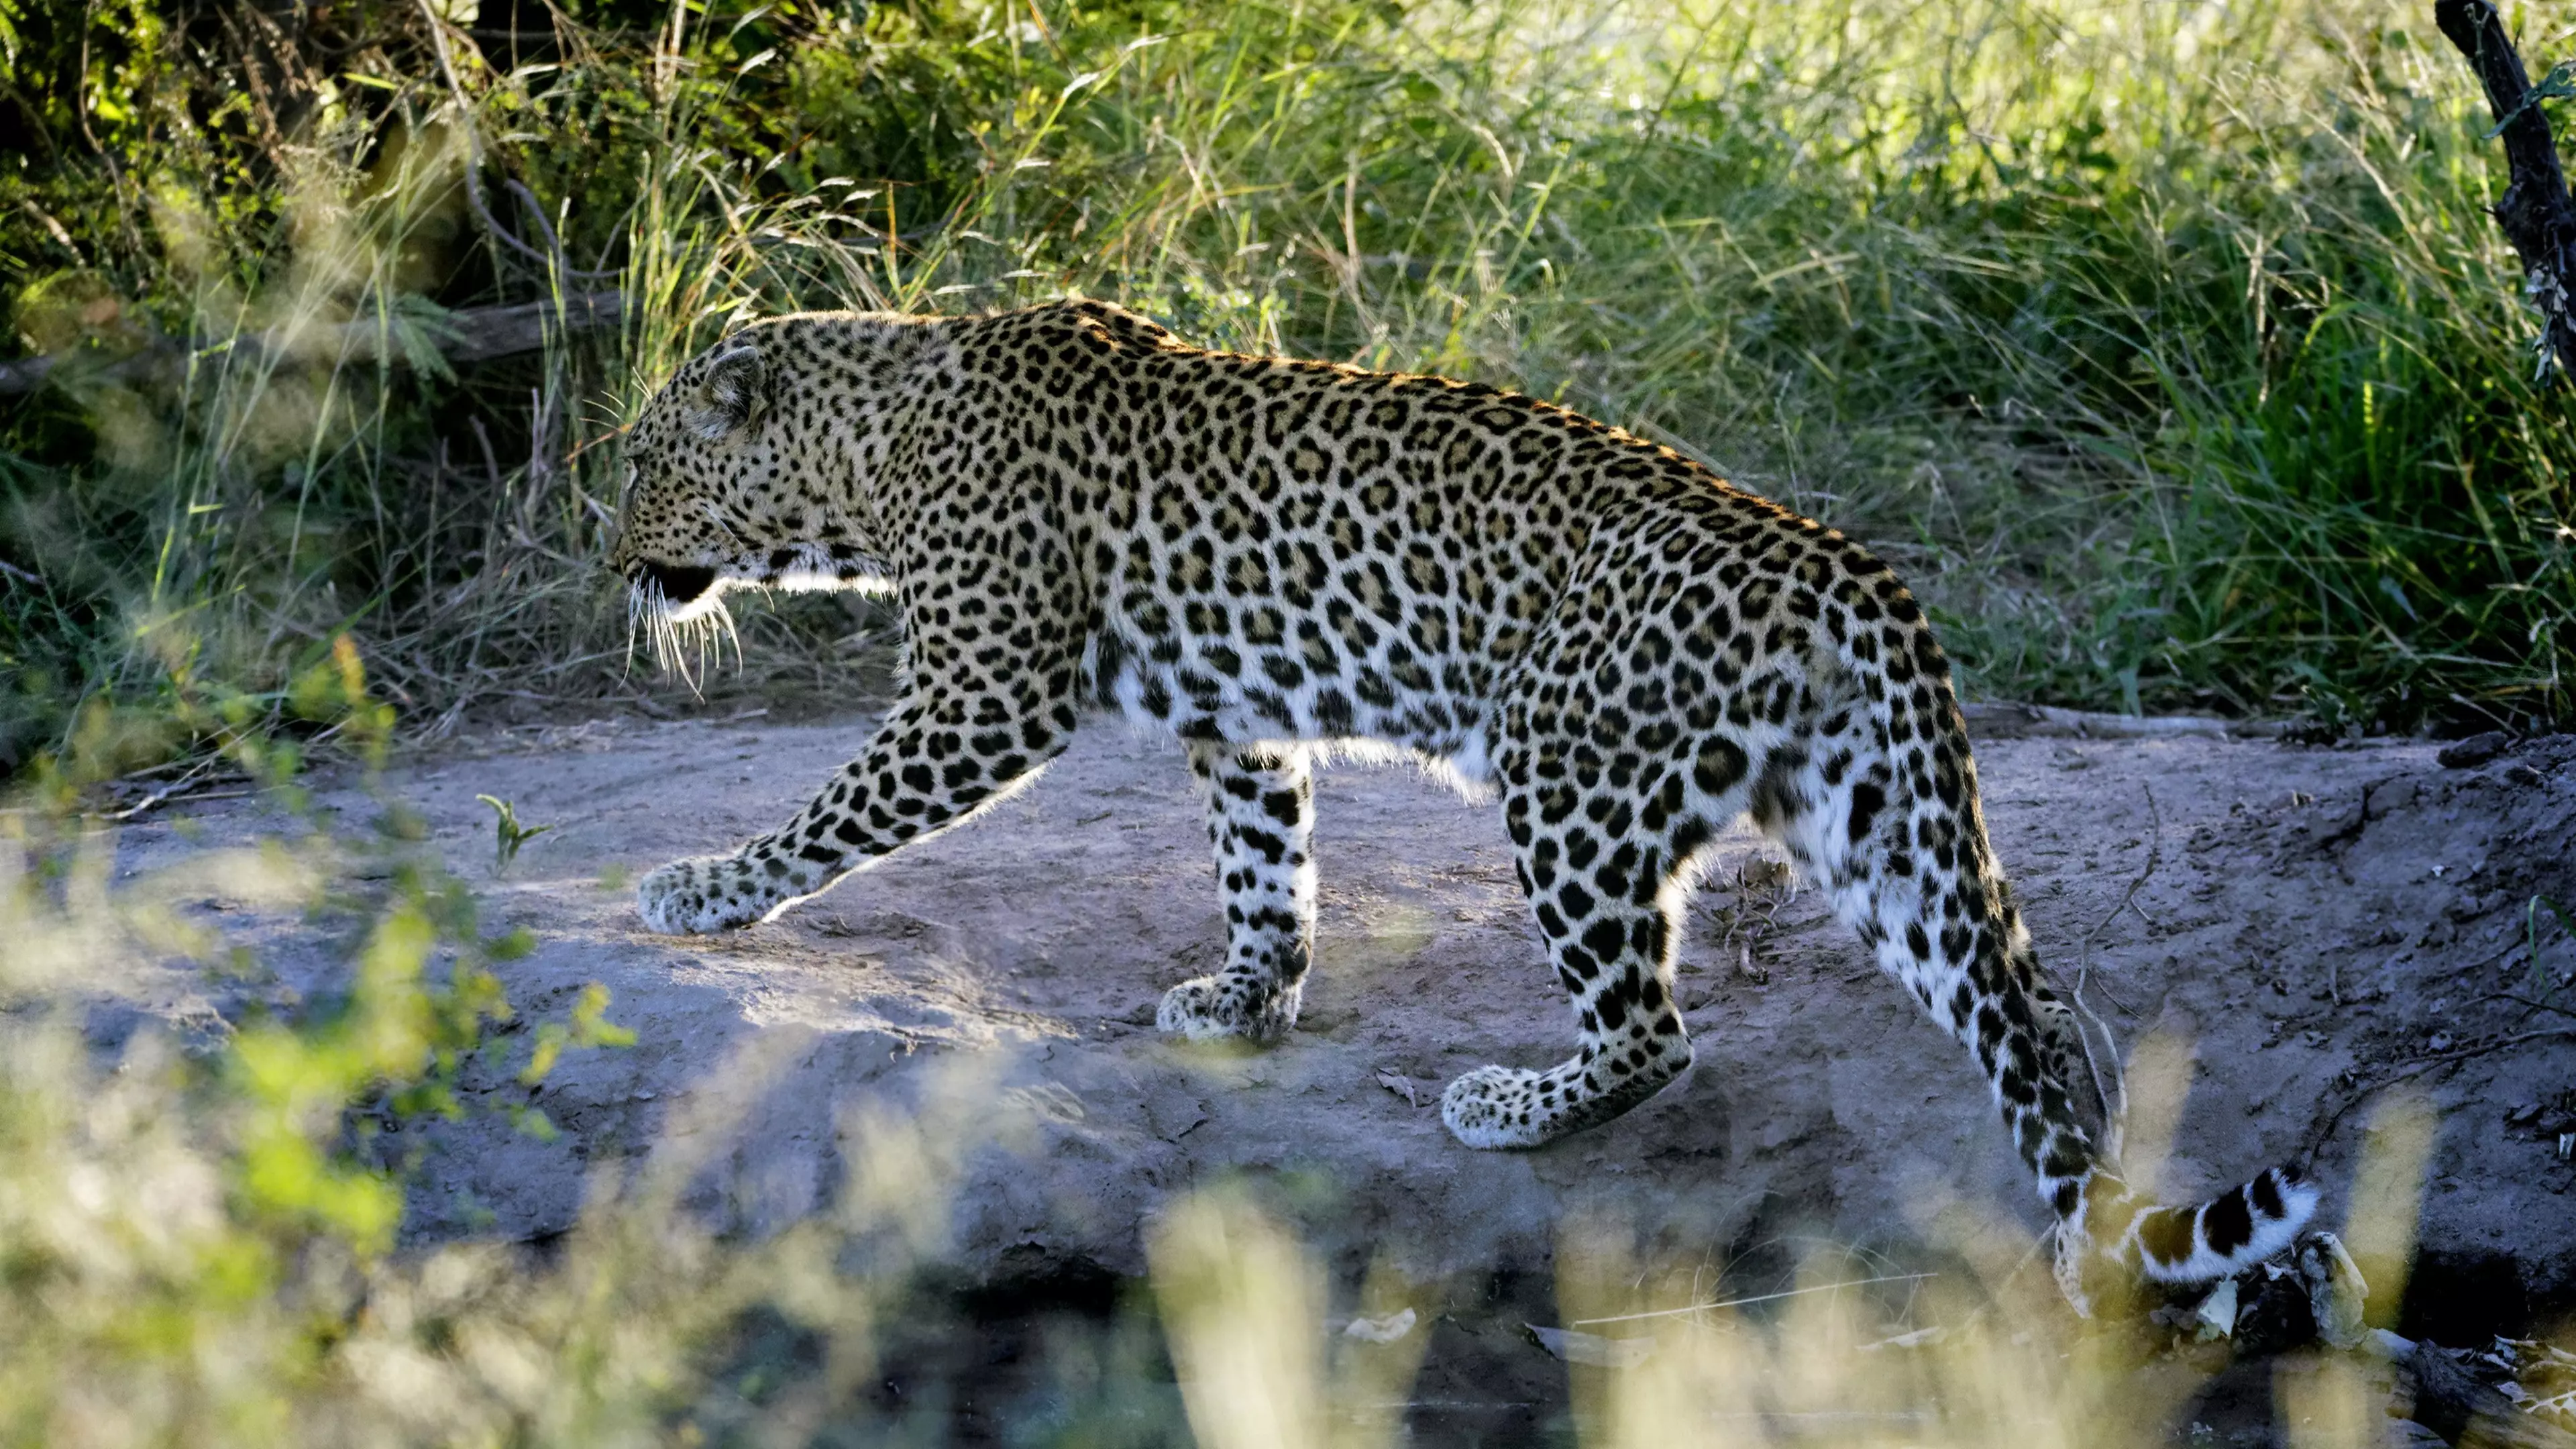 Two-Year-Old Boy Mauled To Death By Leopard At Garden Barbecue 